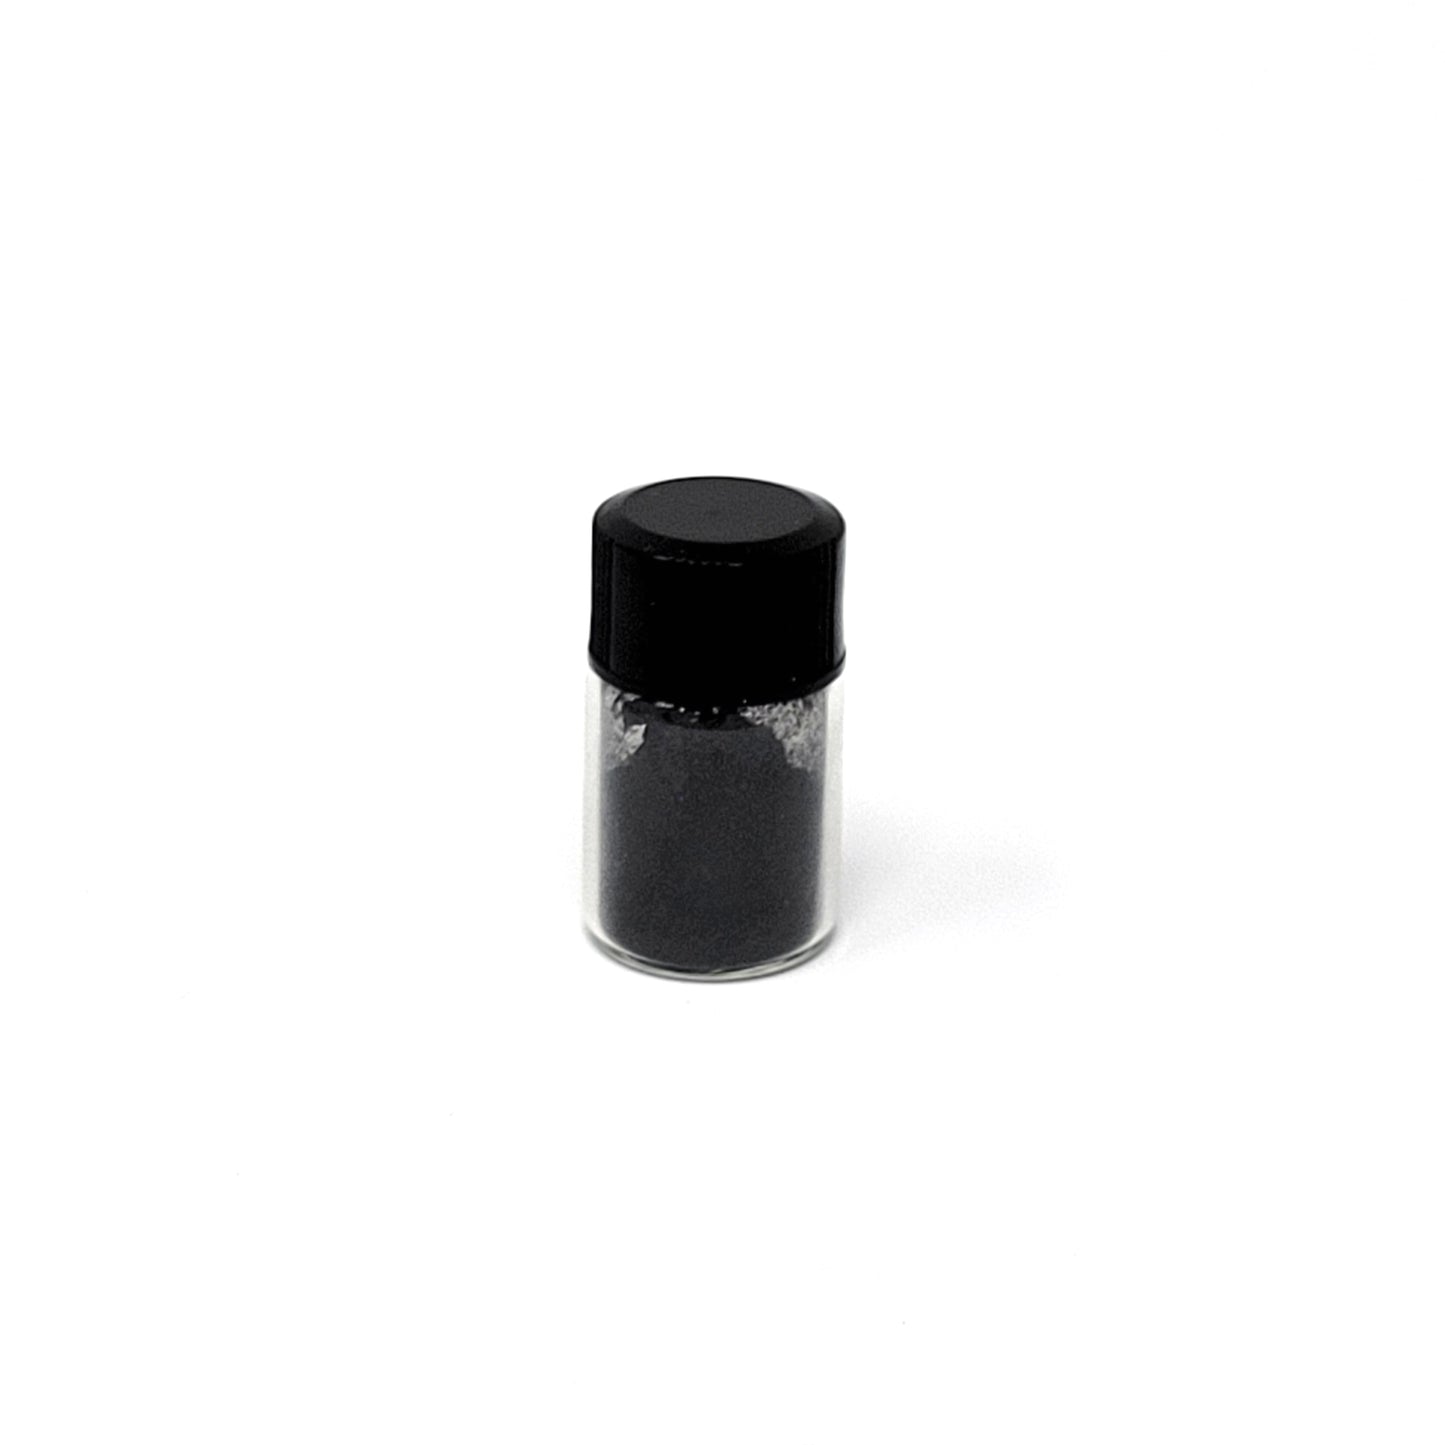 This is a vial of Temporary Tattooth Black Shimmer Colorant.  This is a form of temporary tooth tattoo.